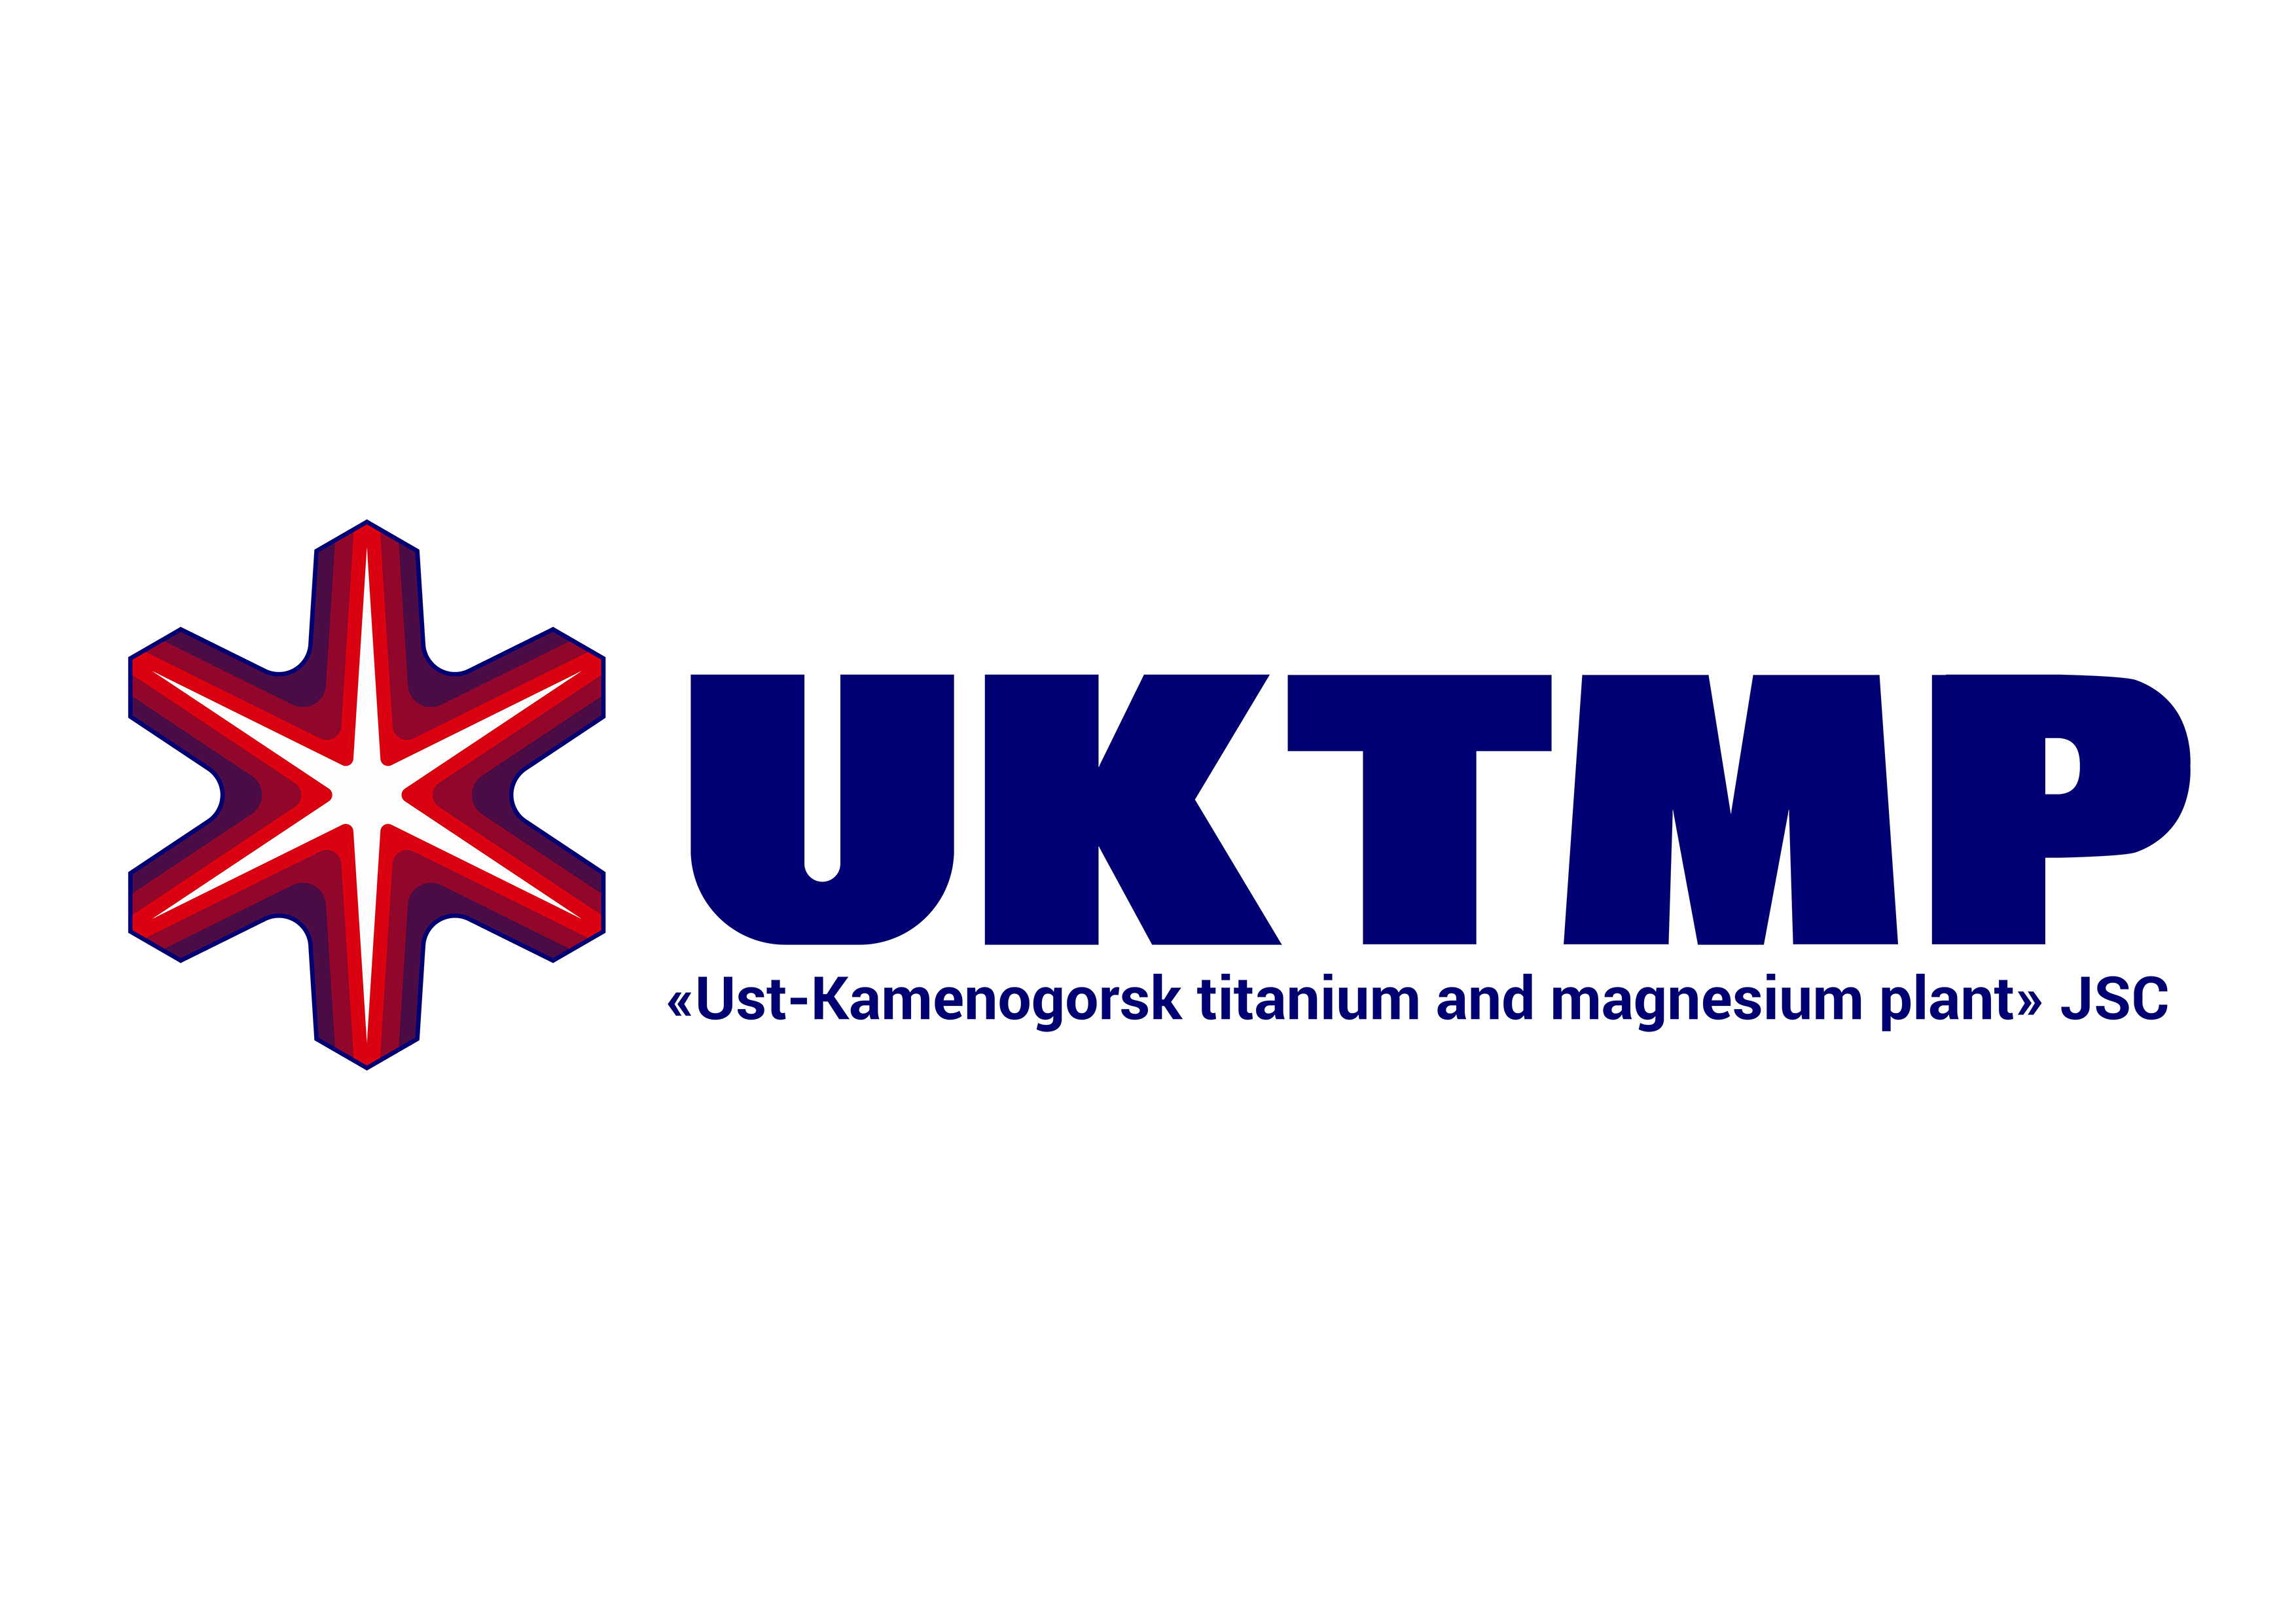 ATTENTION TO SHAREHOLDERS of Ust-Kamenogorsk Titanium and Magnesium Plant JSC!